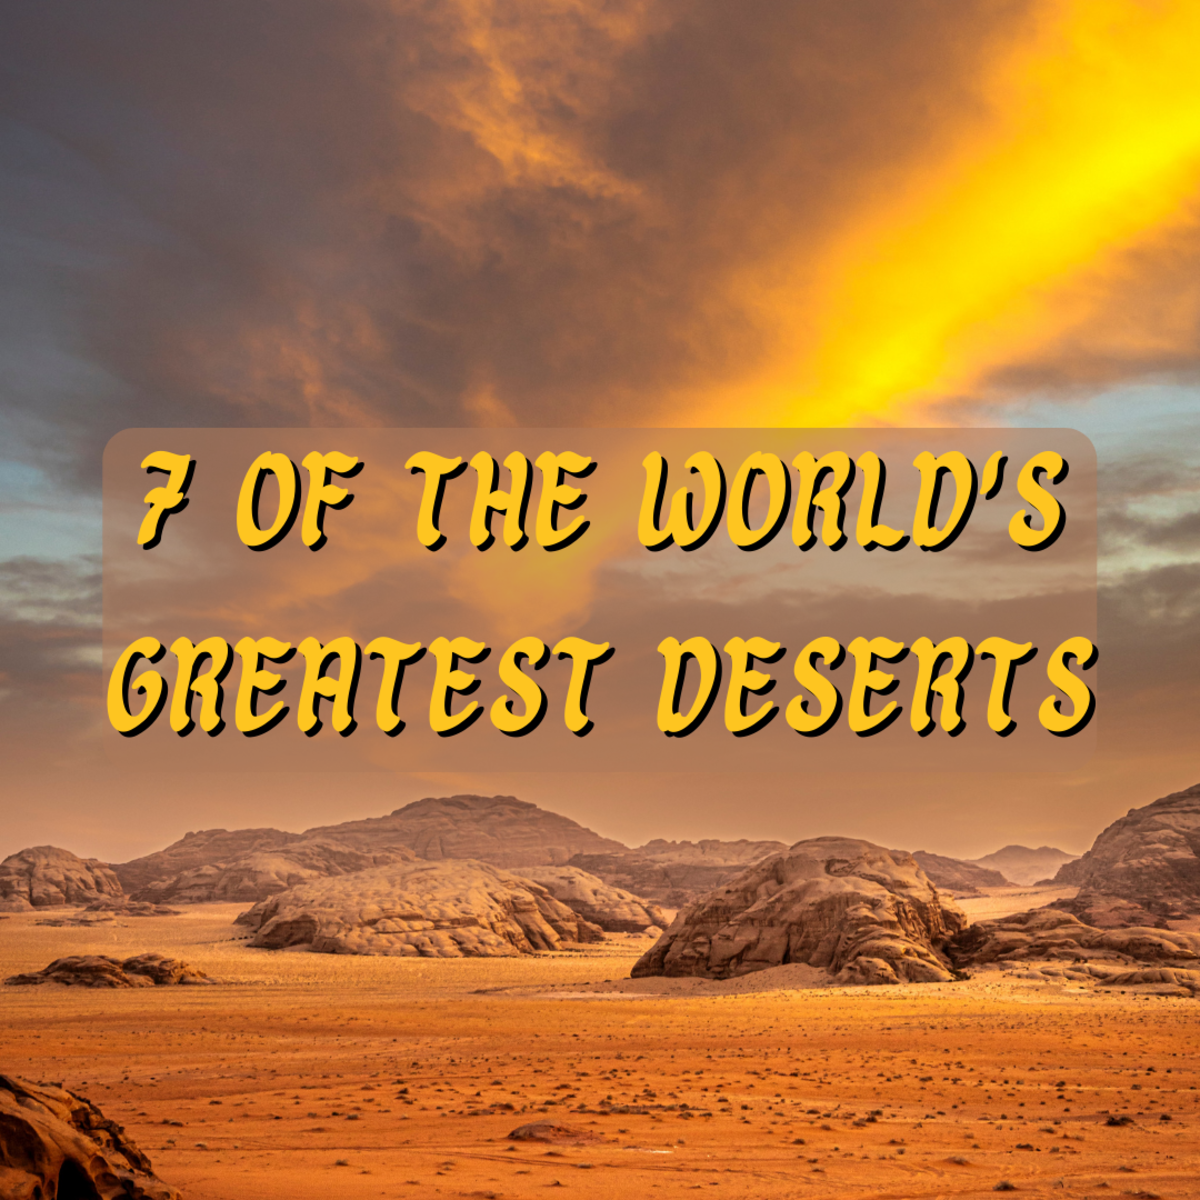 Read on to learn interesting facts and info about 7 of the greatest deserts around the world.